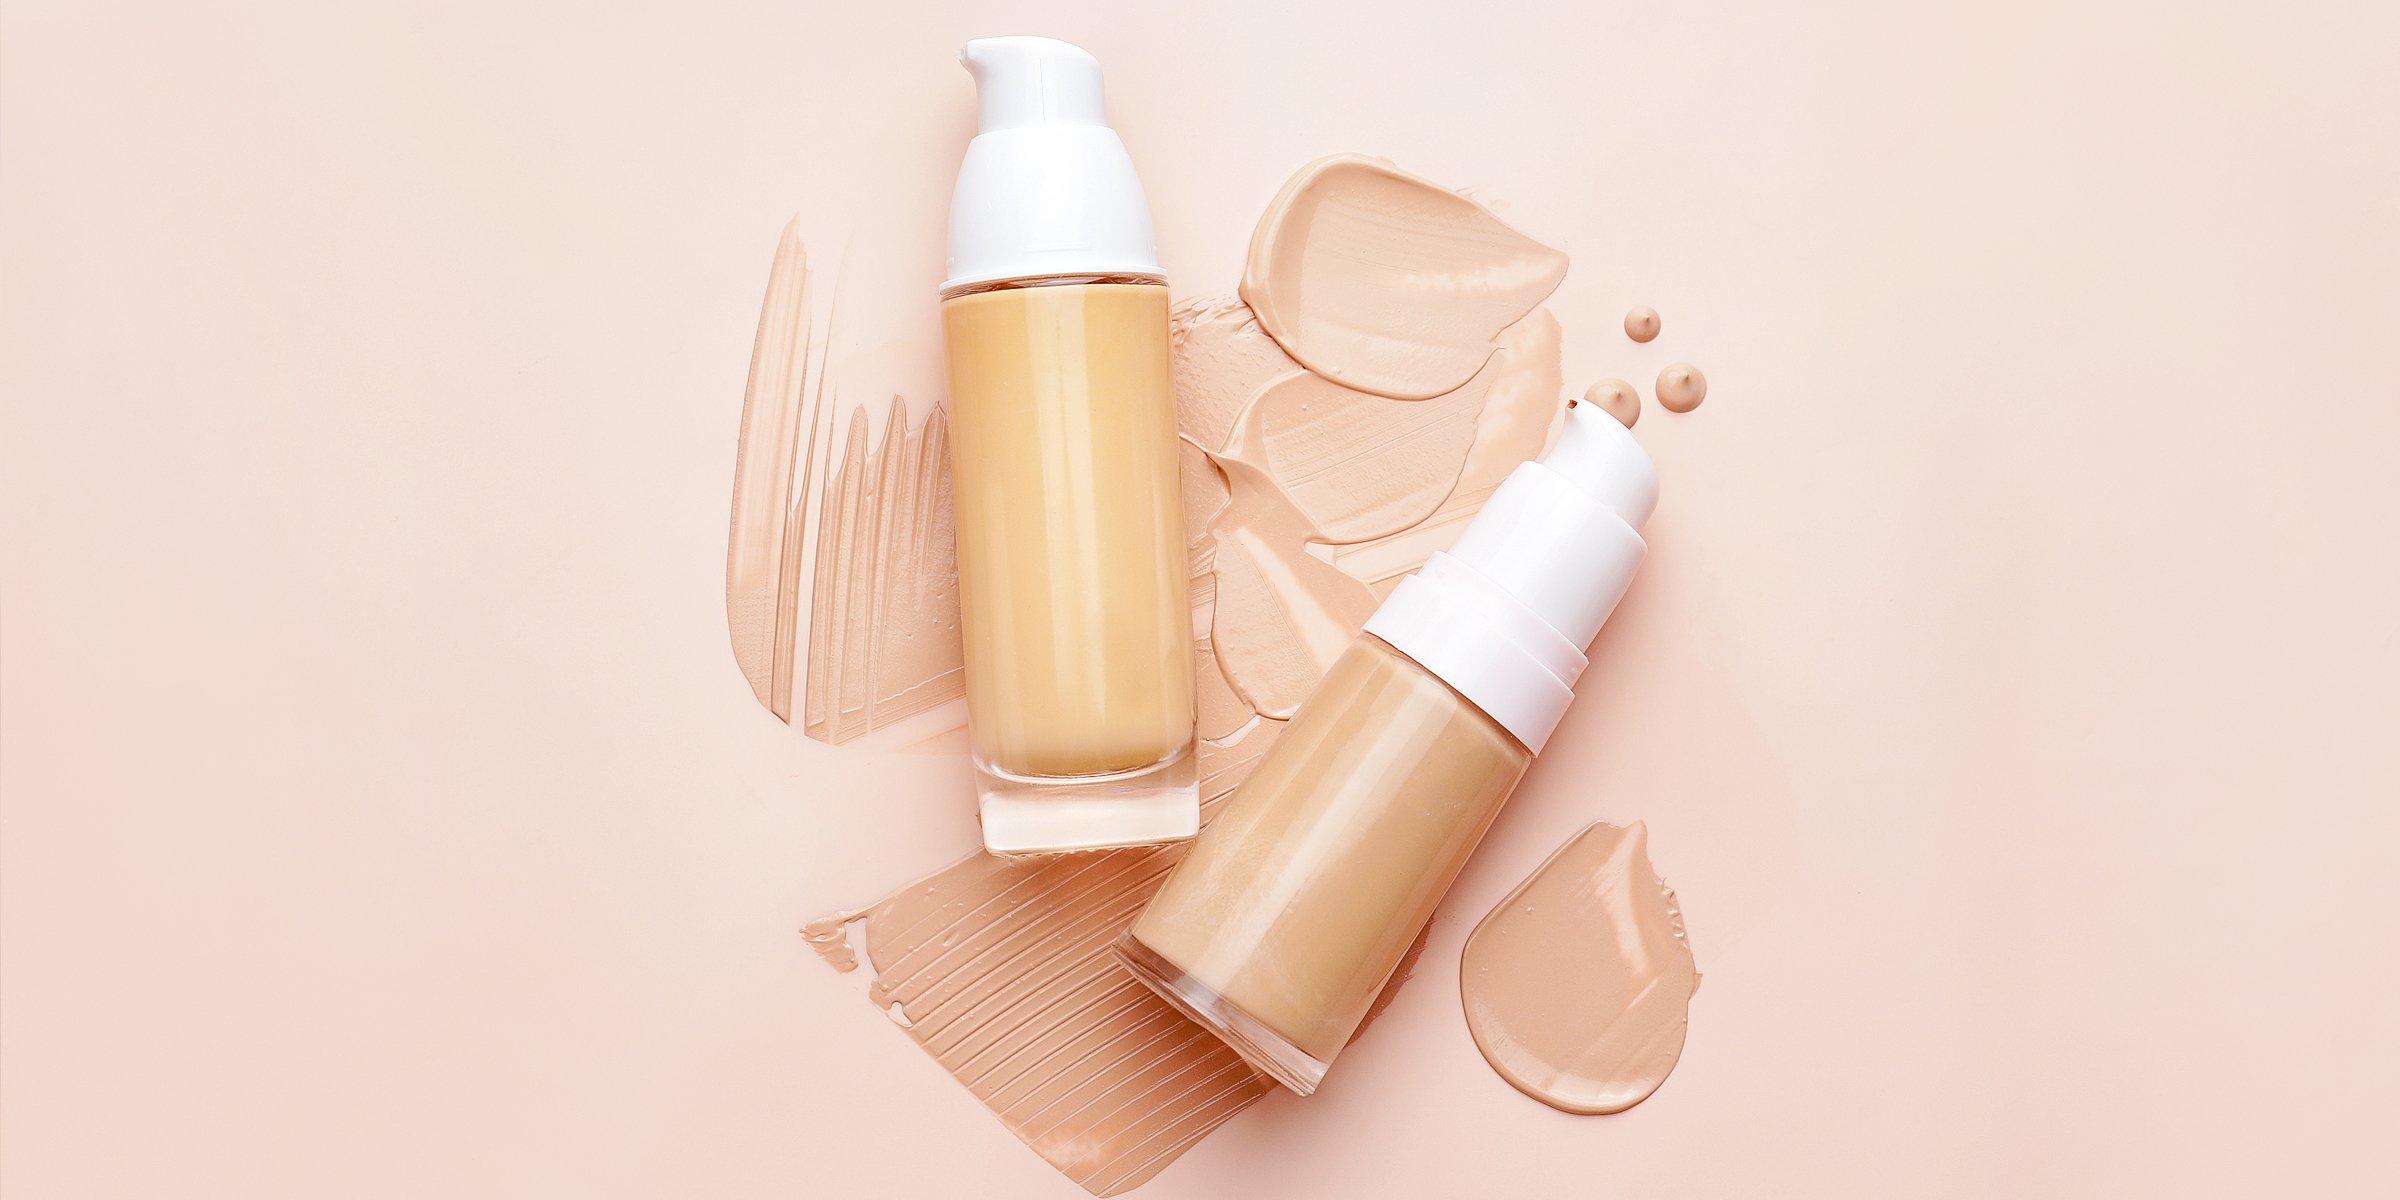 Foundation and concealer. | Source: Shutterstock